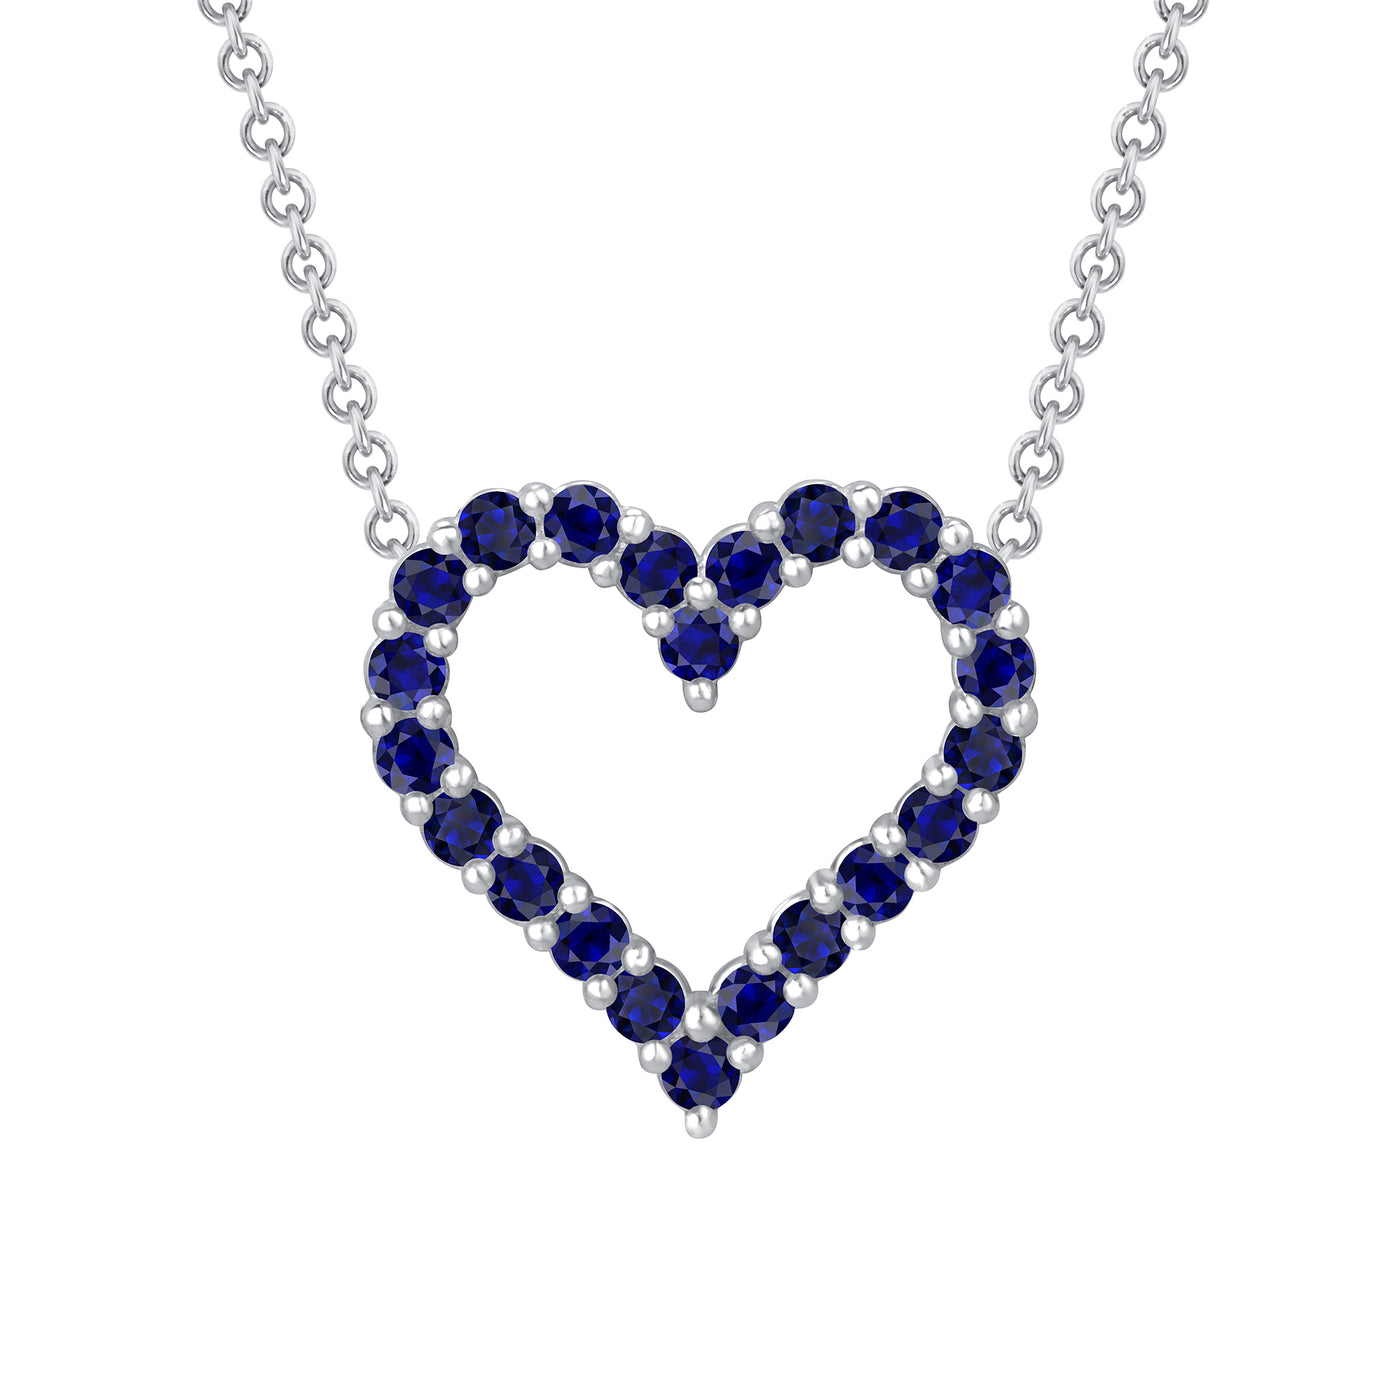 Sapphire Heart Pendant 0.23 Carat Round Cut in Yellow, Rose or White Gold 16" Chain